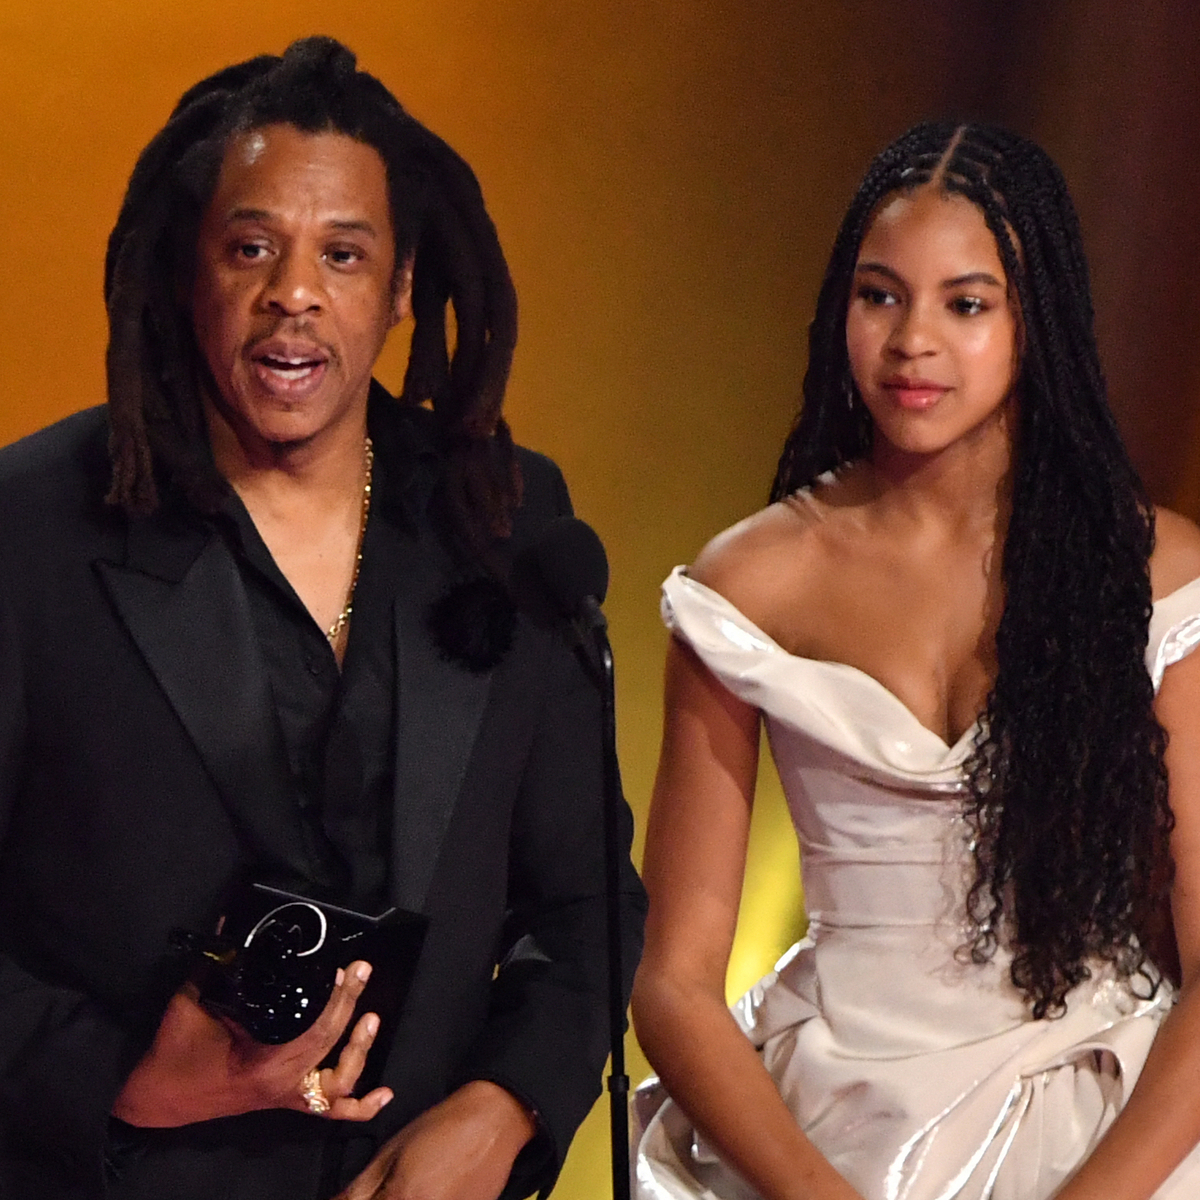 BLUE IVY'S GRAMMY APPEARANCE SPARKS QUESTIONS ABOUT HER AGE, HEIGHT AND MORE